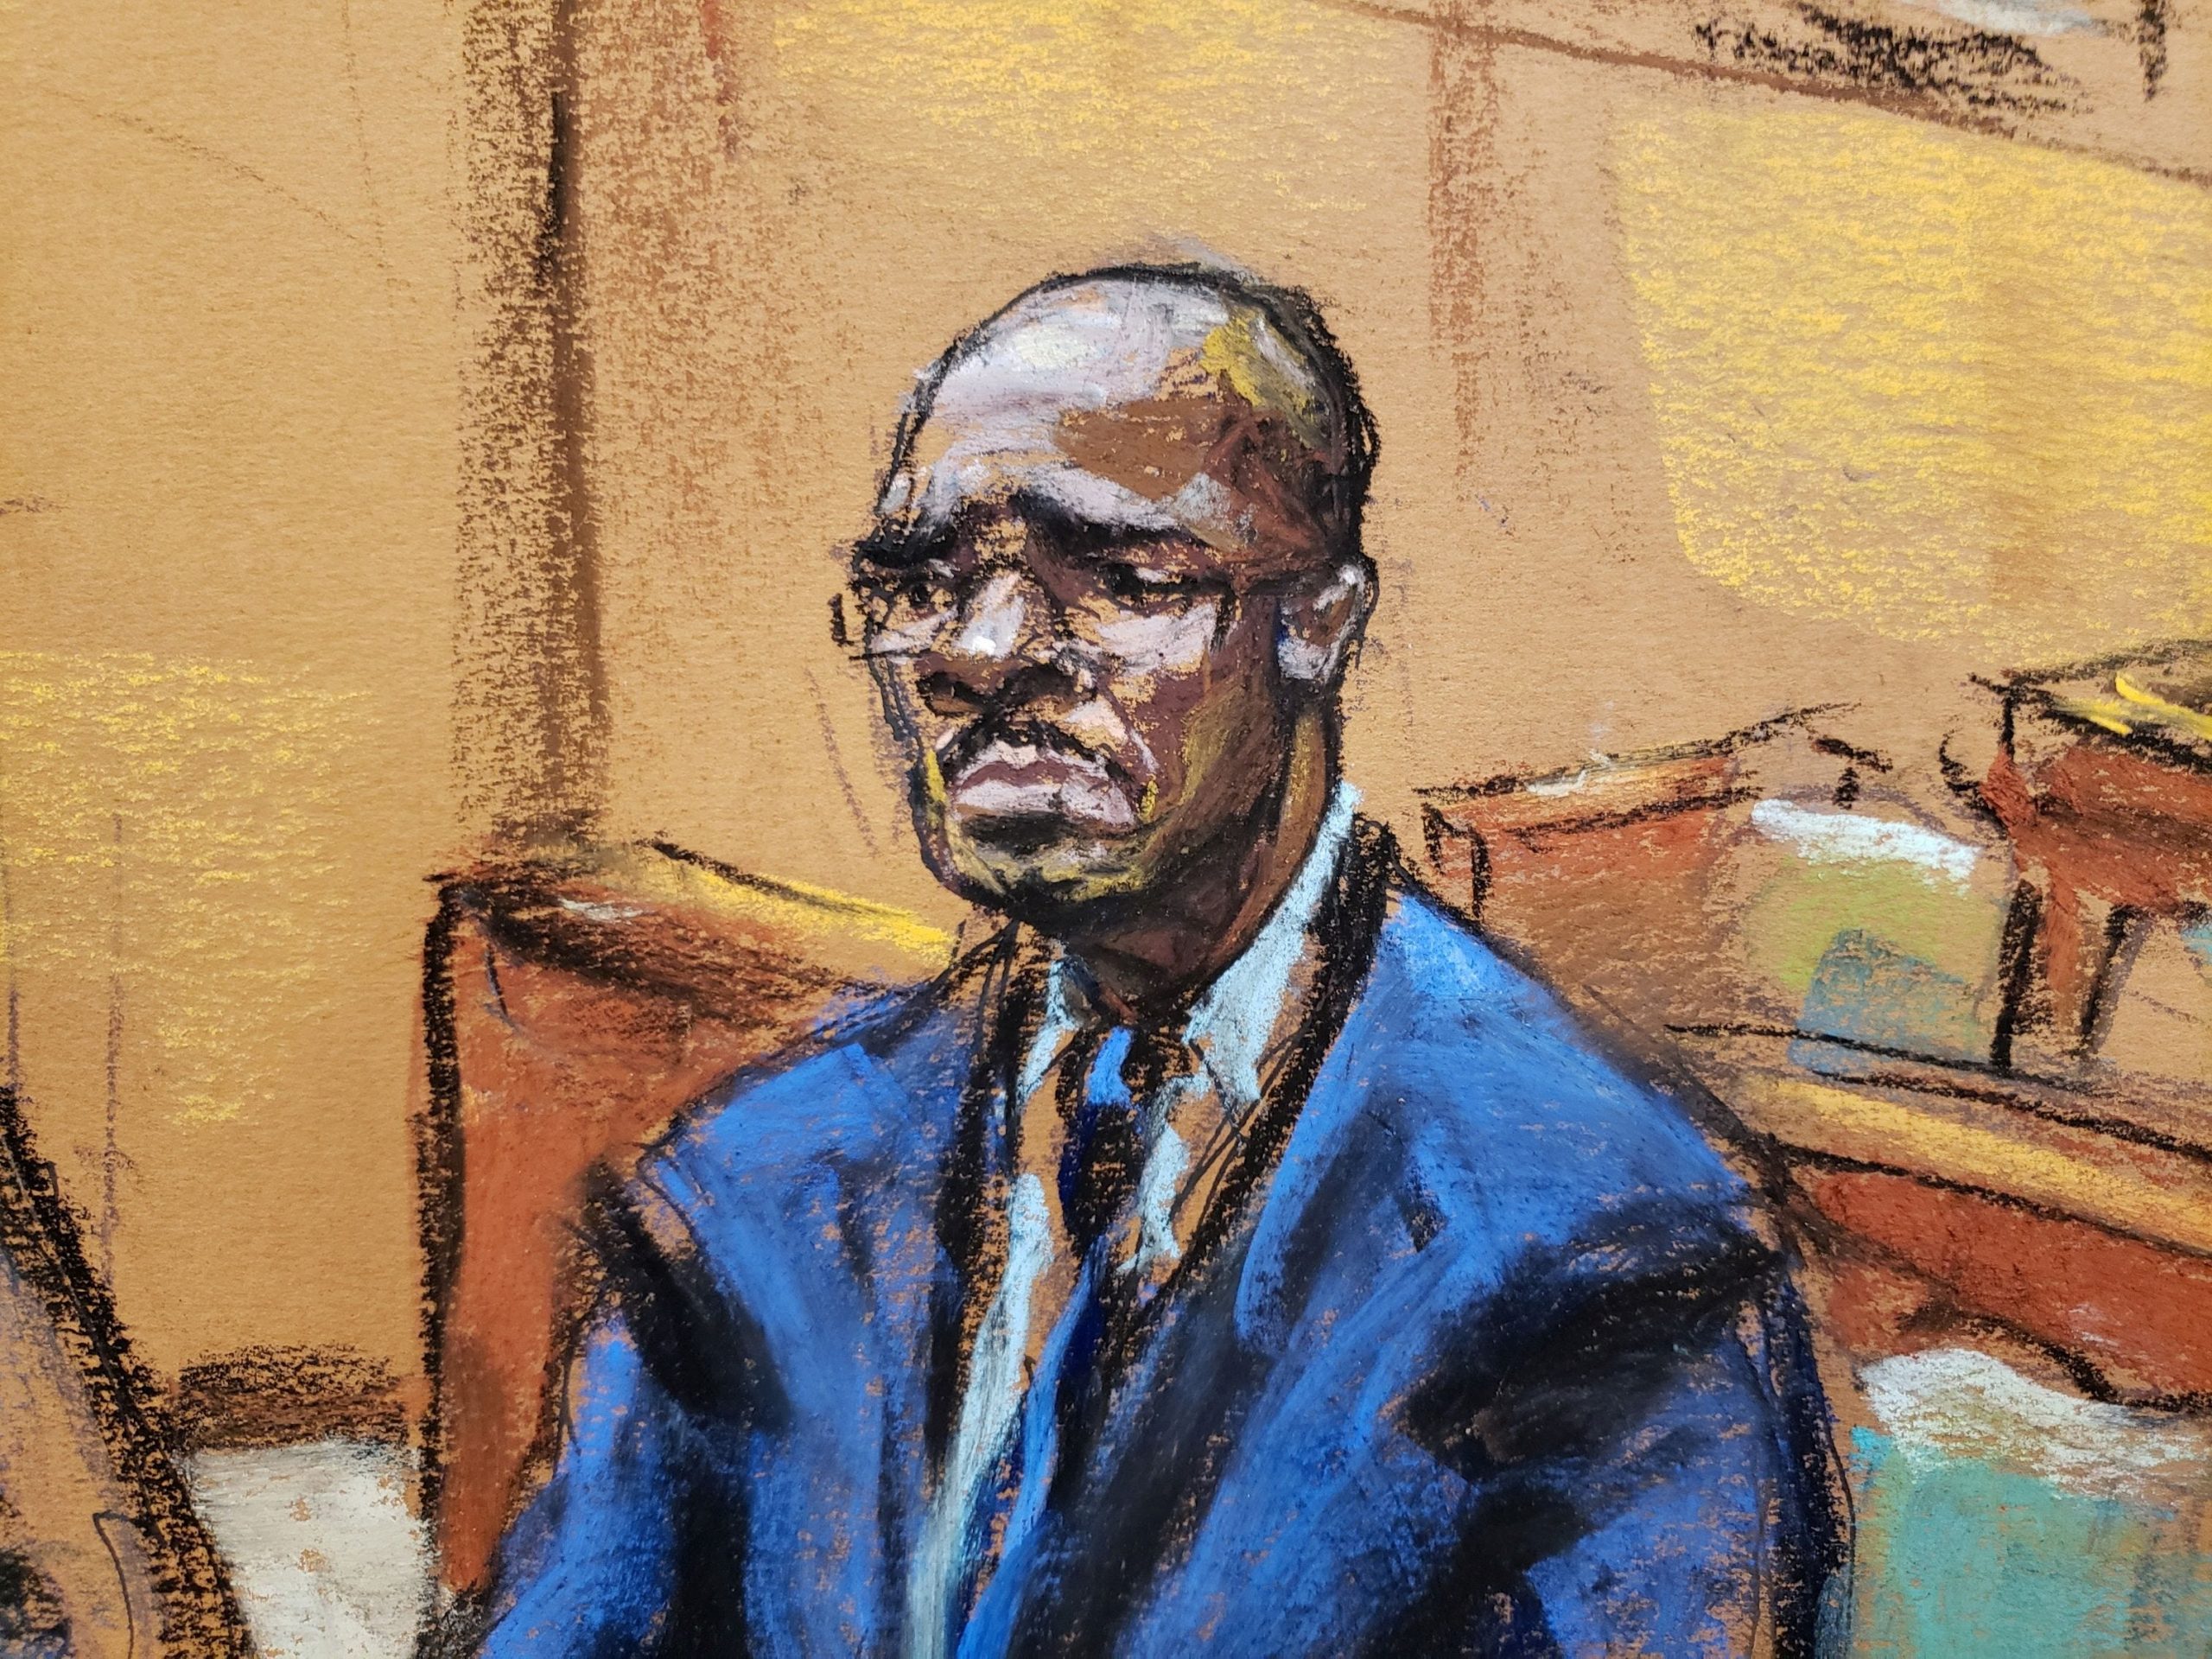 A courtroom sketch of R. Kelly in a blue suit.